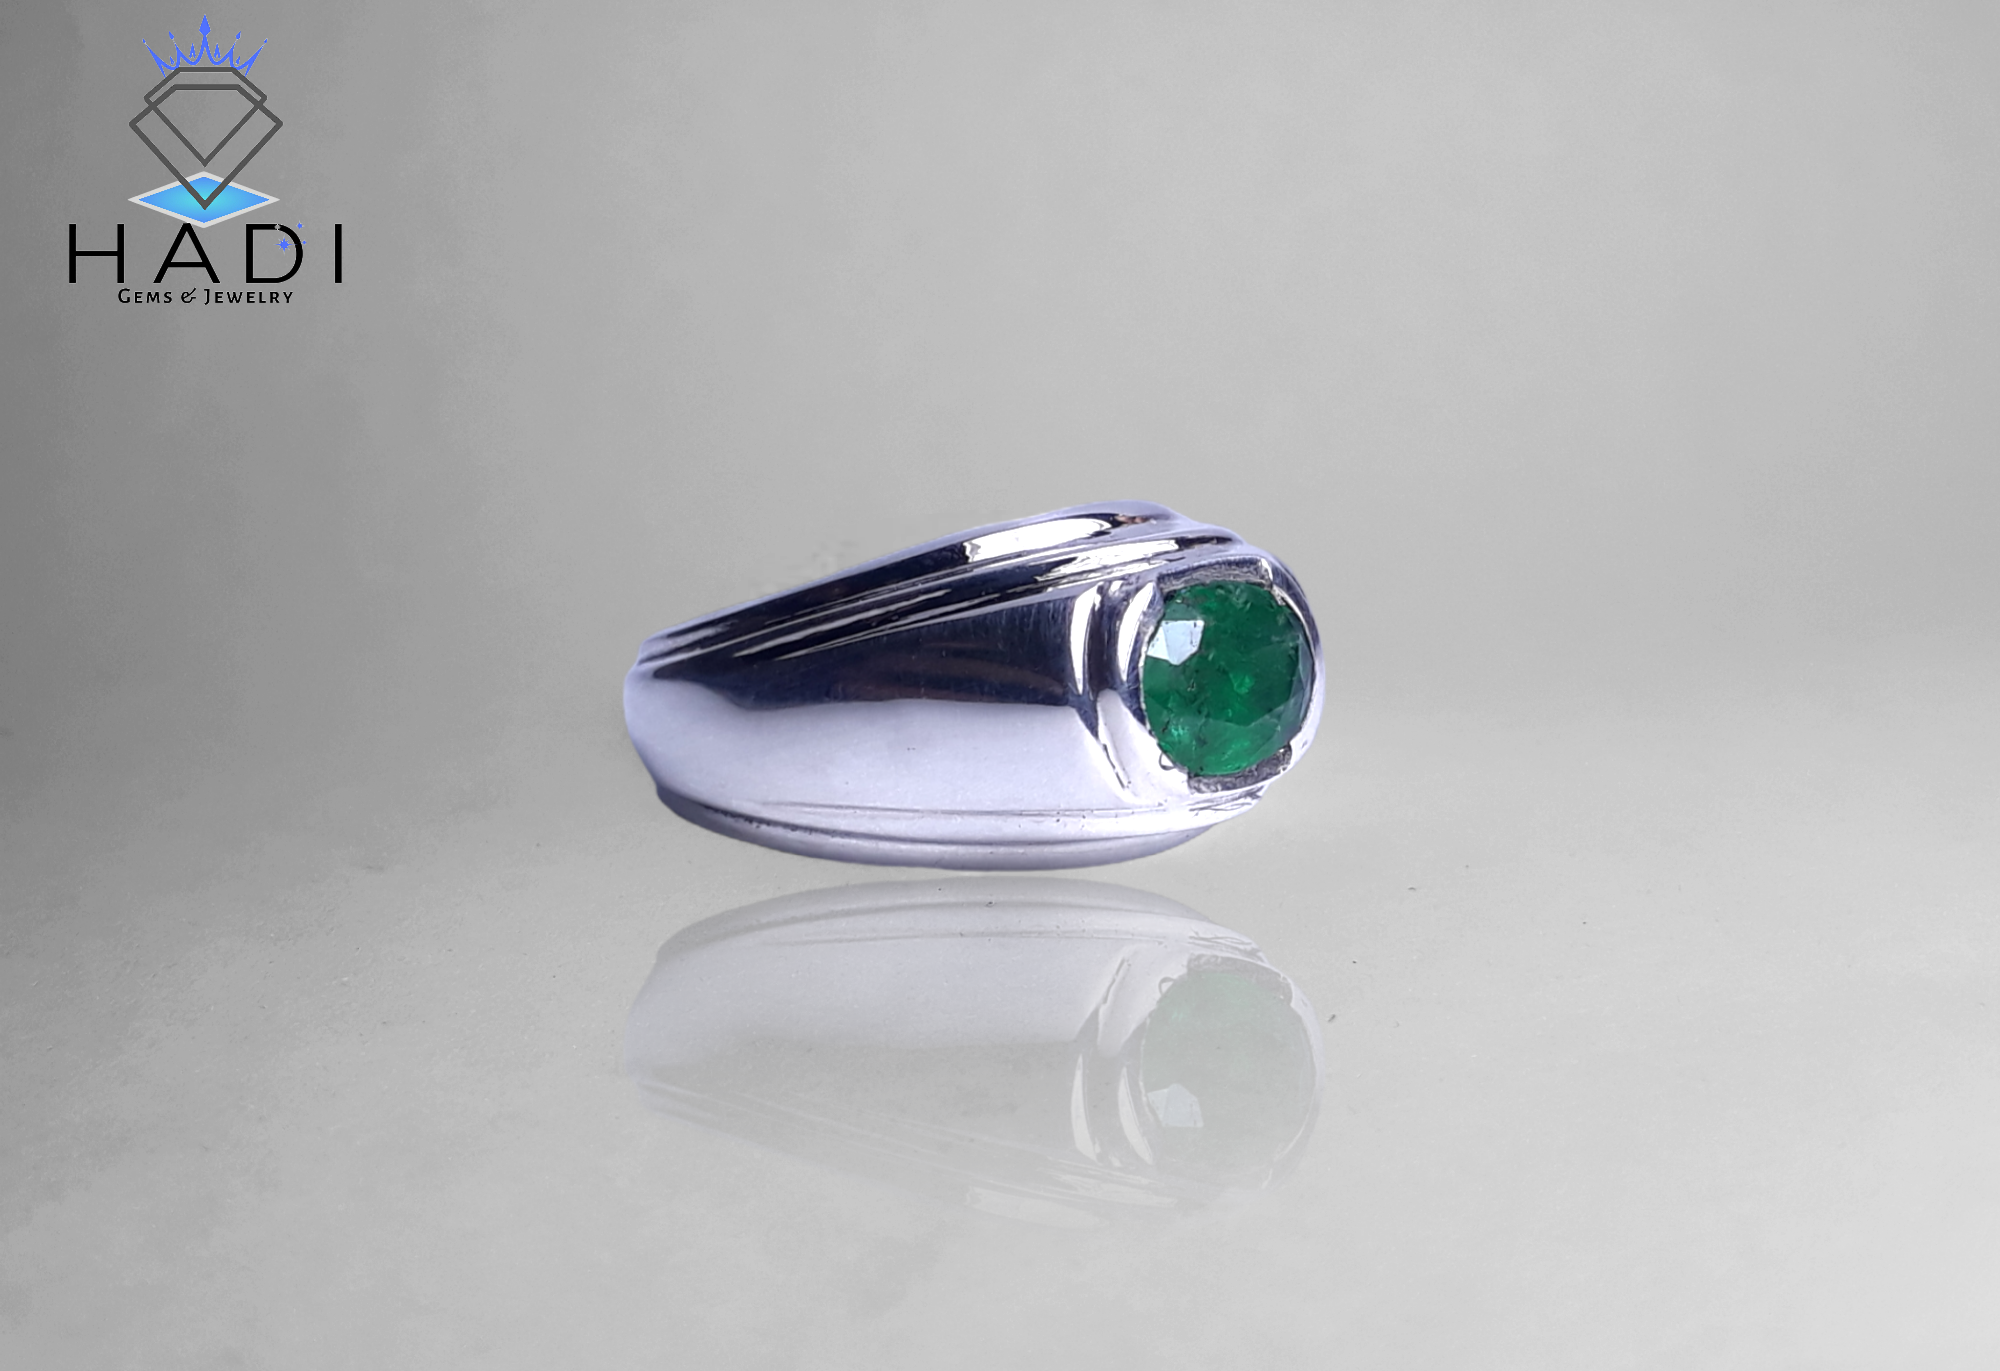 14k White-Gold Plated Natural 1.9ct Emerald Ring - Crafted in Sterling Silver - Perfect & Elegant Design